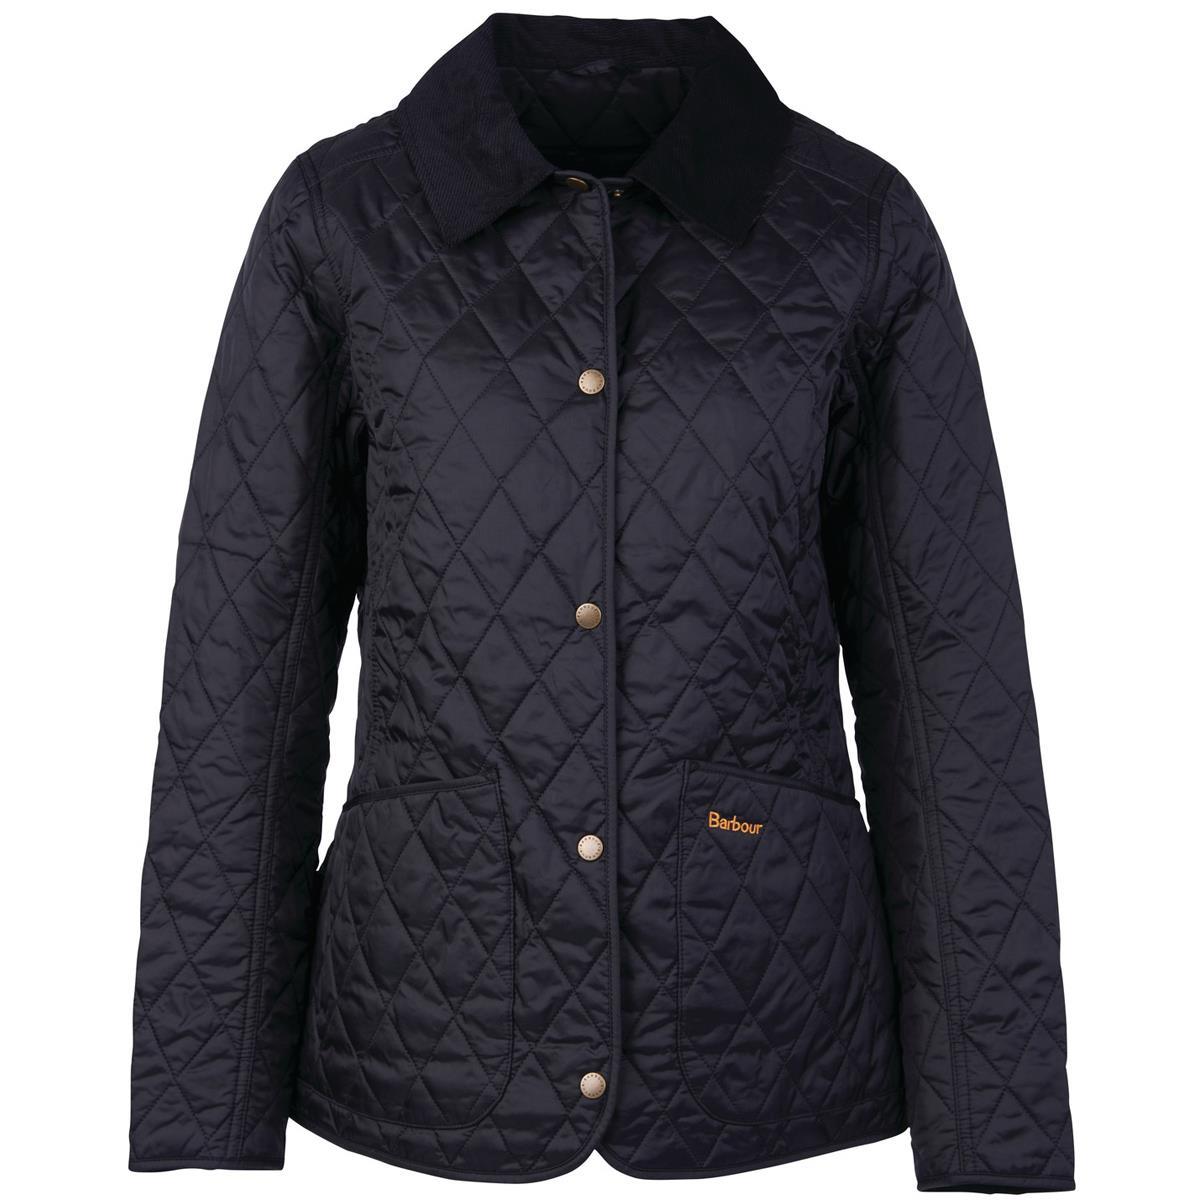 What materials are used in the Barbour Annandale Quilted Jacket?